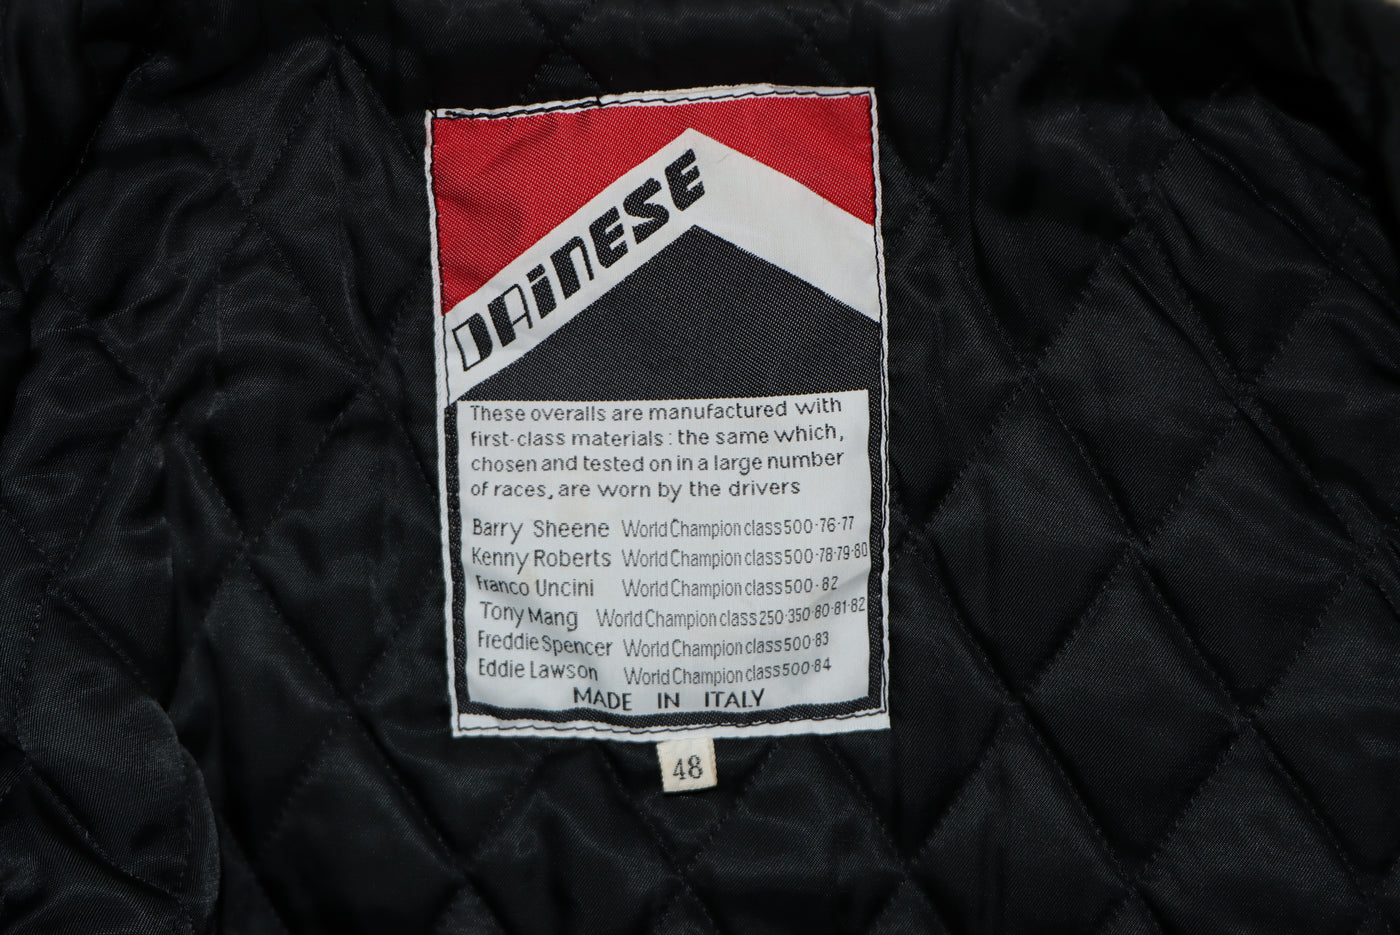 Dainese giacca da moto vintage in pelle made in Italy taglia 48